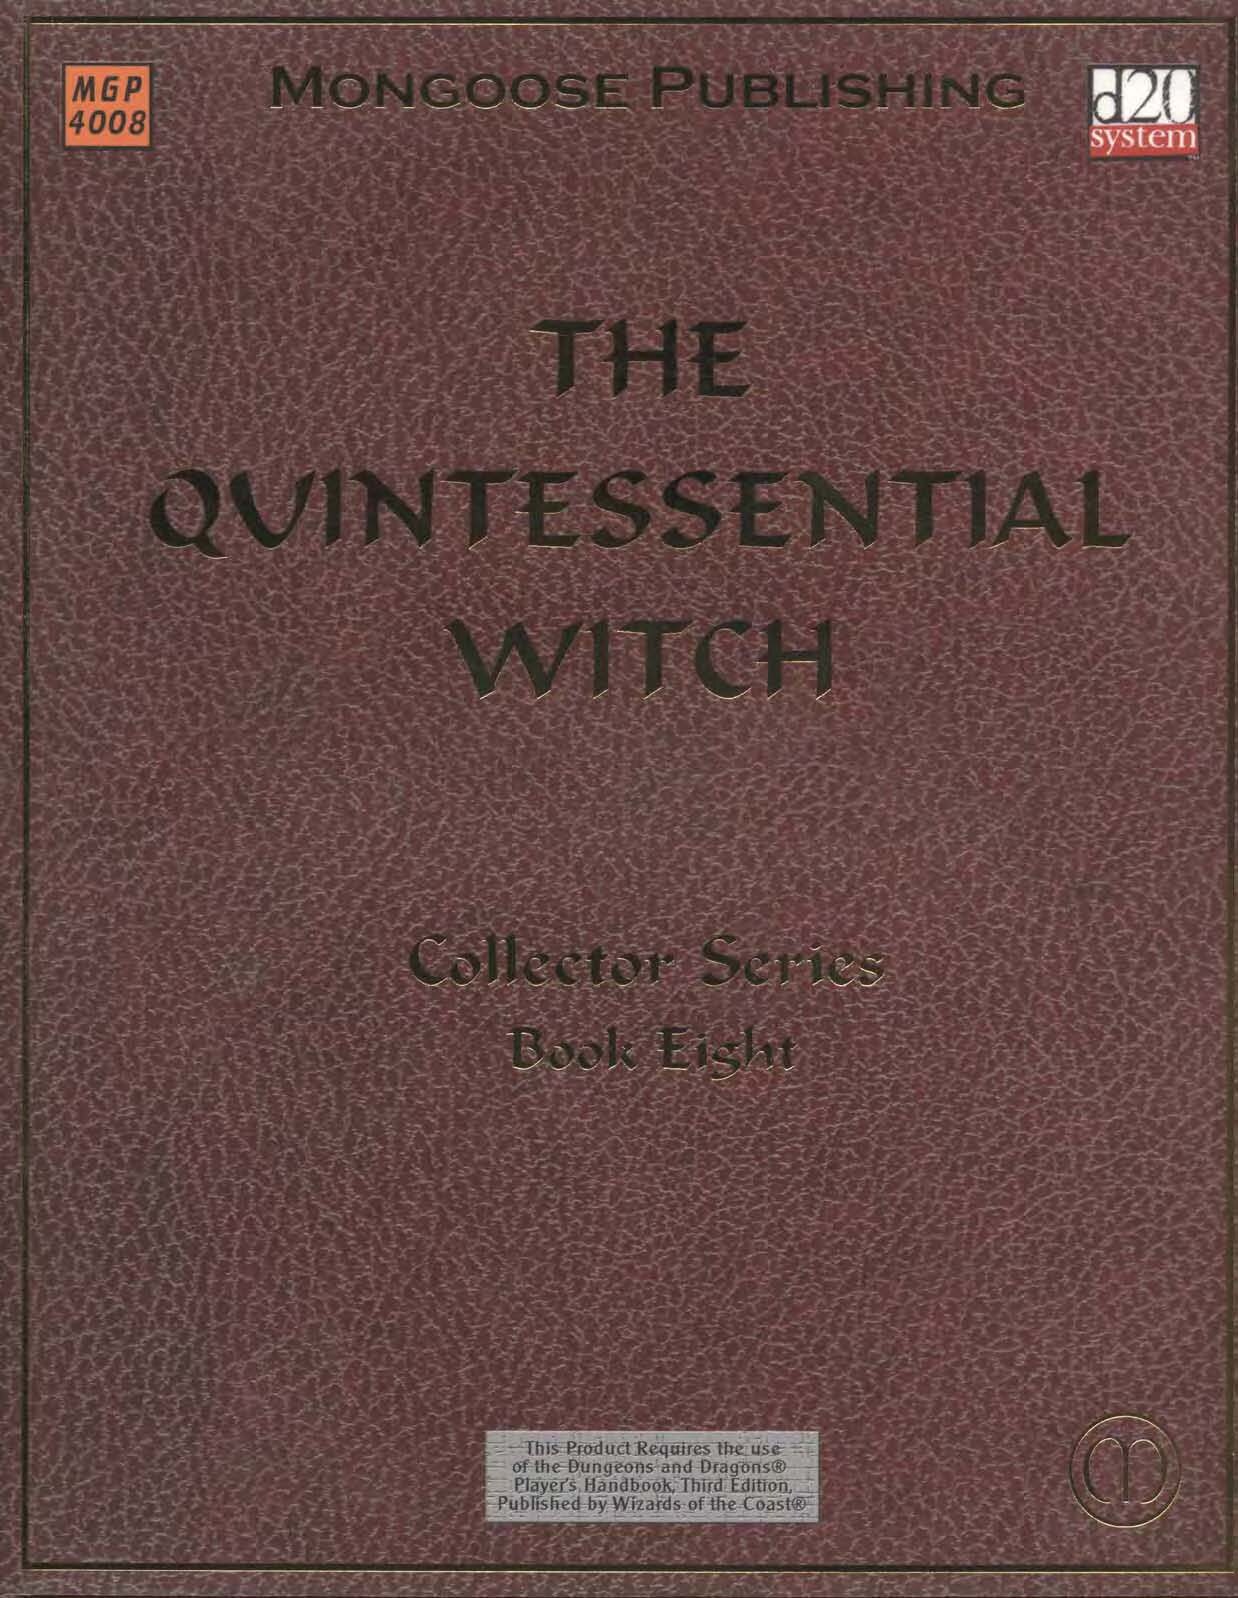 The Quintessential Witch